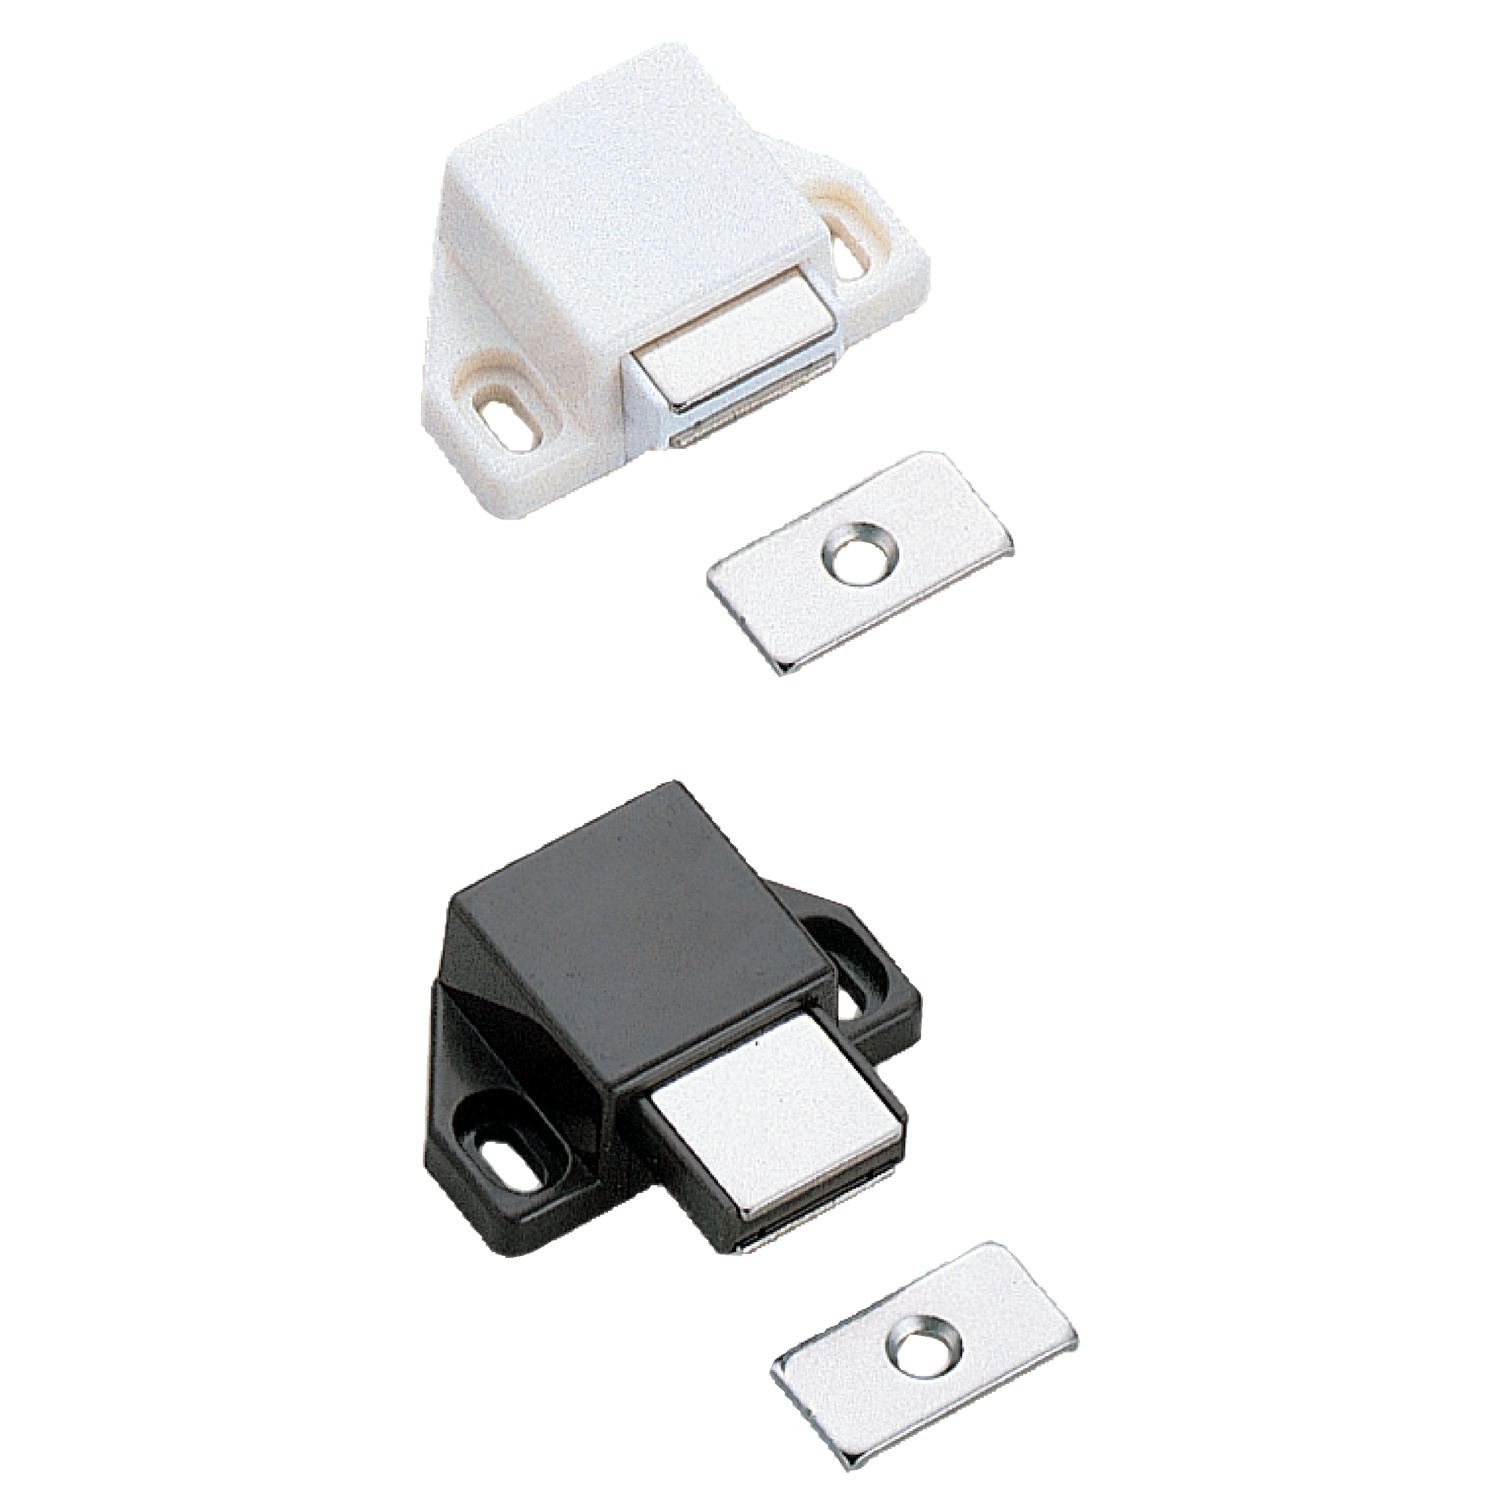 Magnetic Touch Latches Uses the same principle as a regular touch latch, however being magnetic prevents marking and makes them suitable for repeated use in lightweight applications.